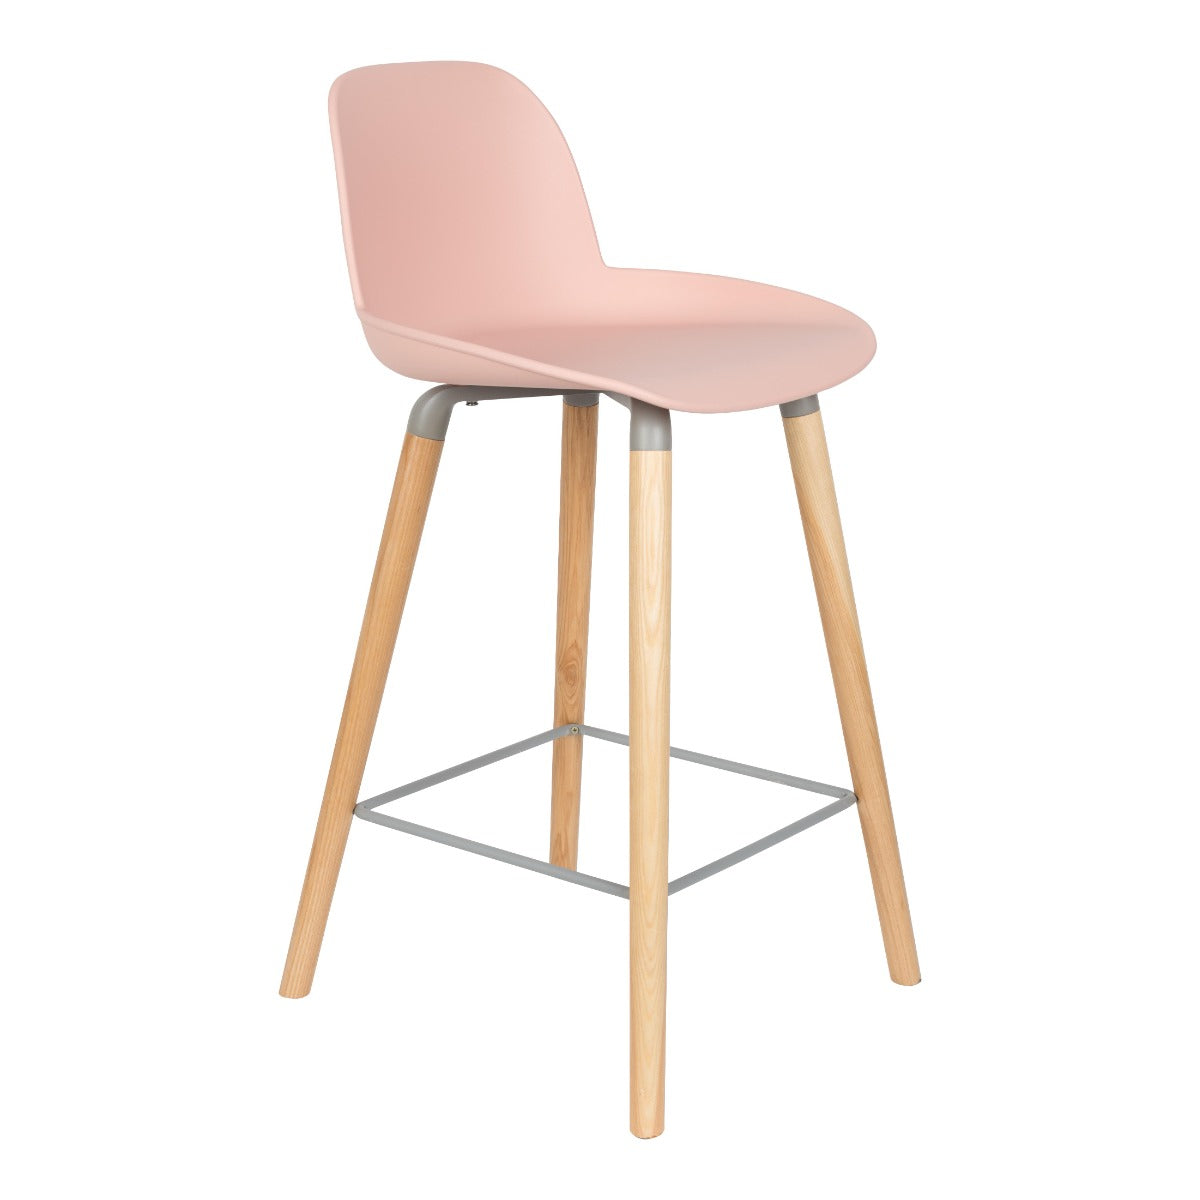 The Albert Kuip bar stool, designed by the Amsterdam Studio Ape, is an amazing combination of modern and retro style. The streamlined seat is supported by wooden, minimalist ash wood legs. It is an ideal addition to a modern kitchen island or a climate, hotel bar. It is also worth paying attention to a specially prepared leg place that improves sitting comfort.